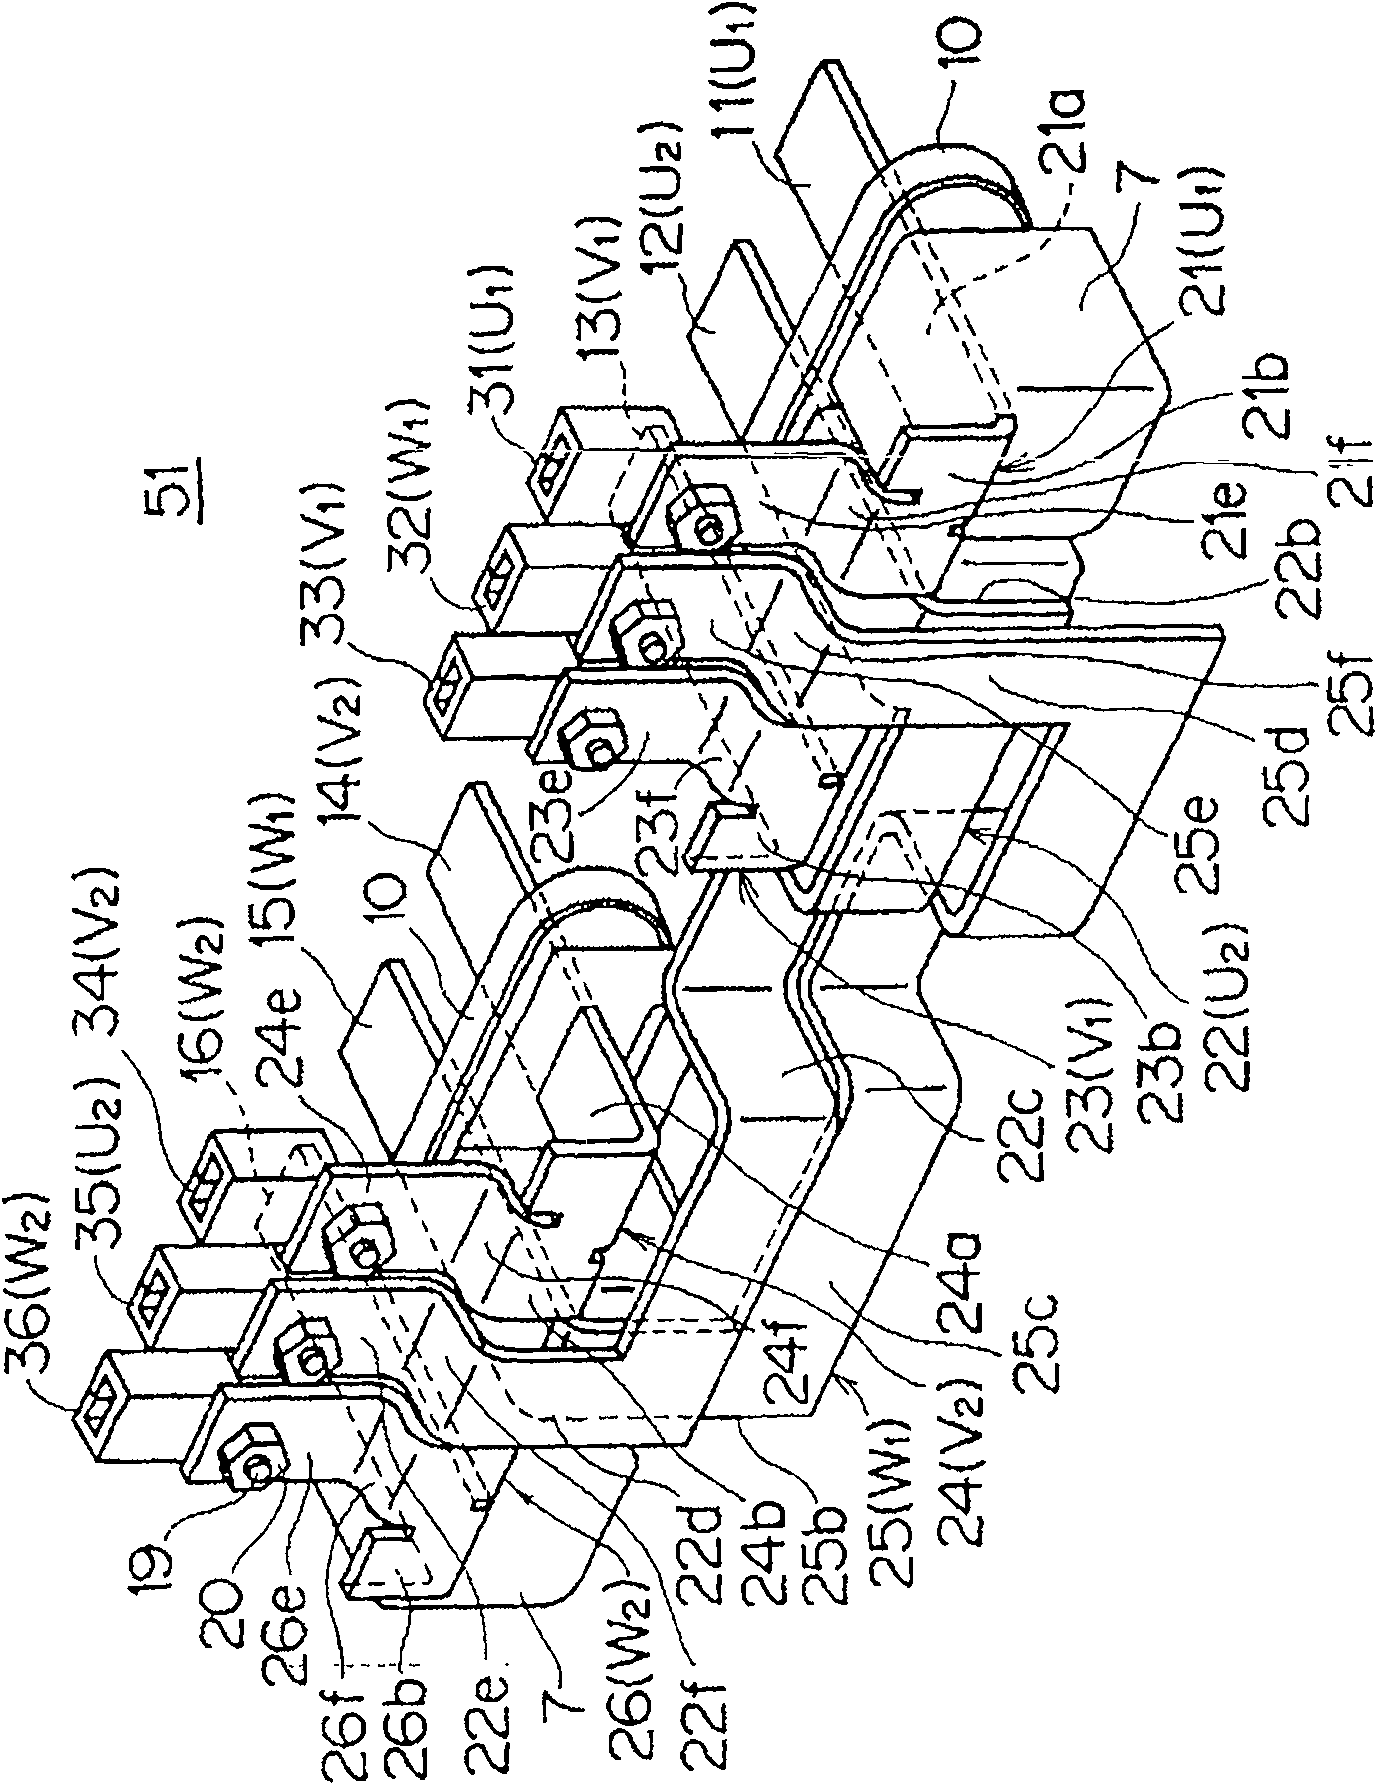 Apparatus direct mounting connector